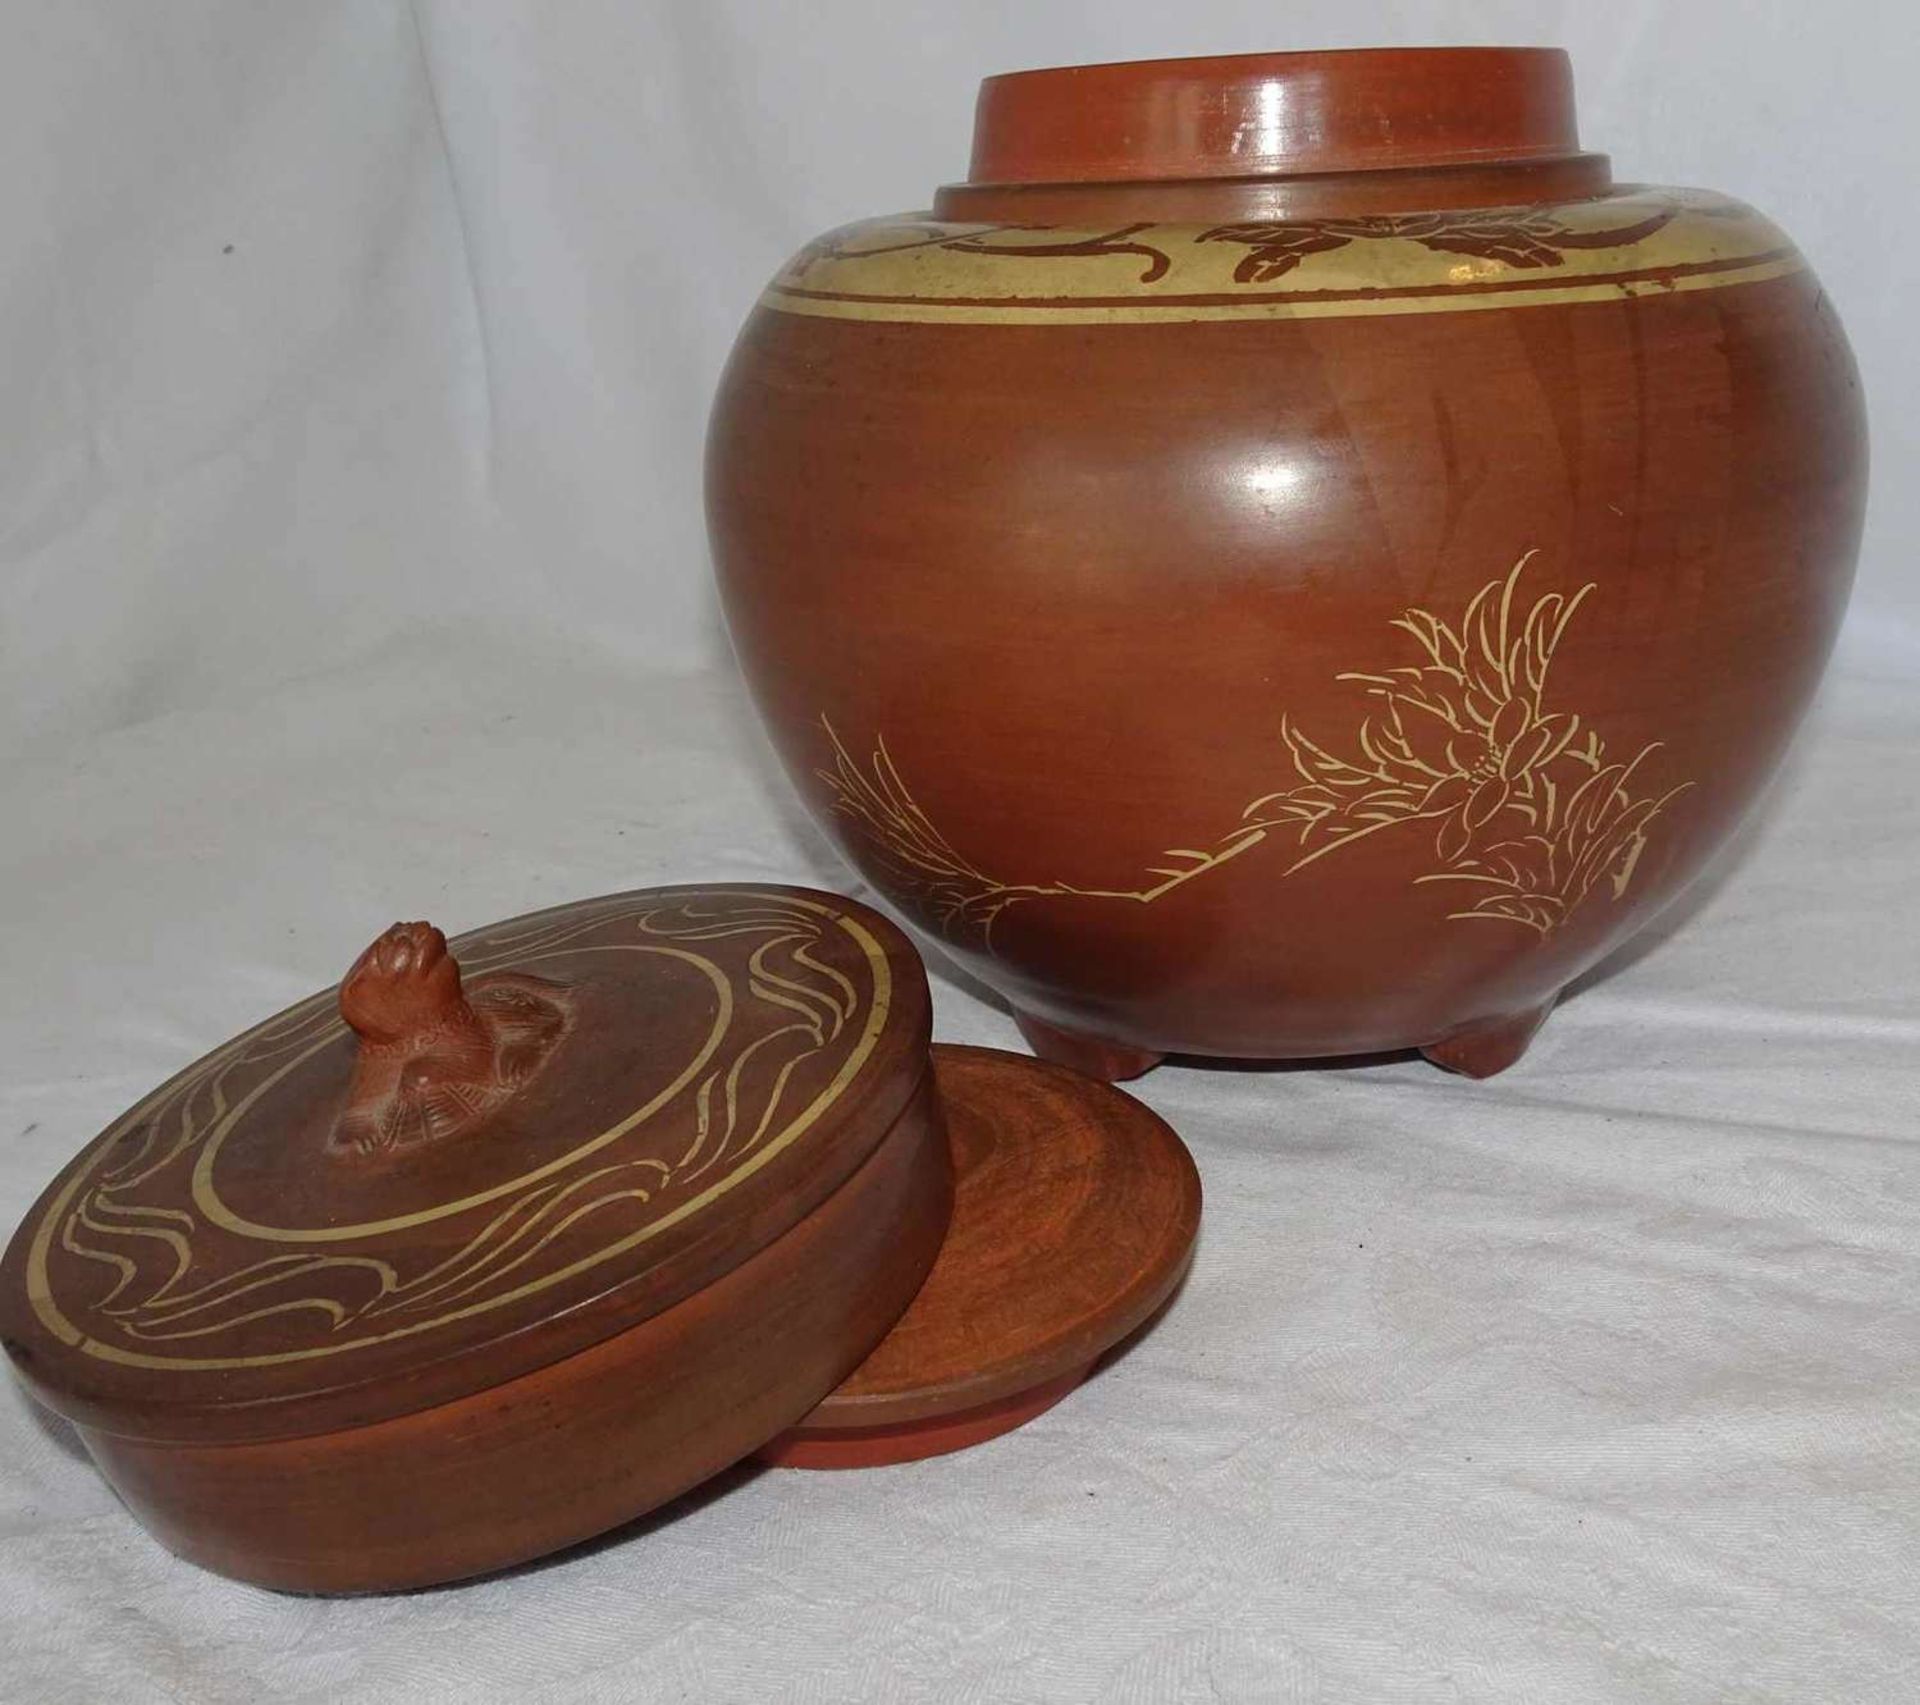 A brown clay pot Malysia, fine glaze. Standing on 4 feet, height approx. 18 cm. With inner